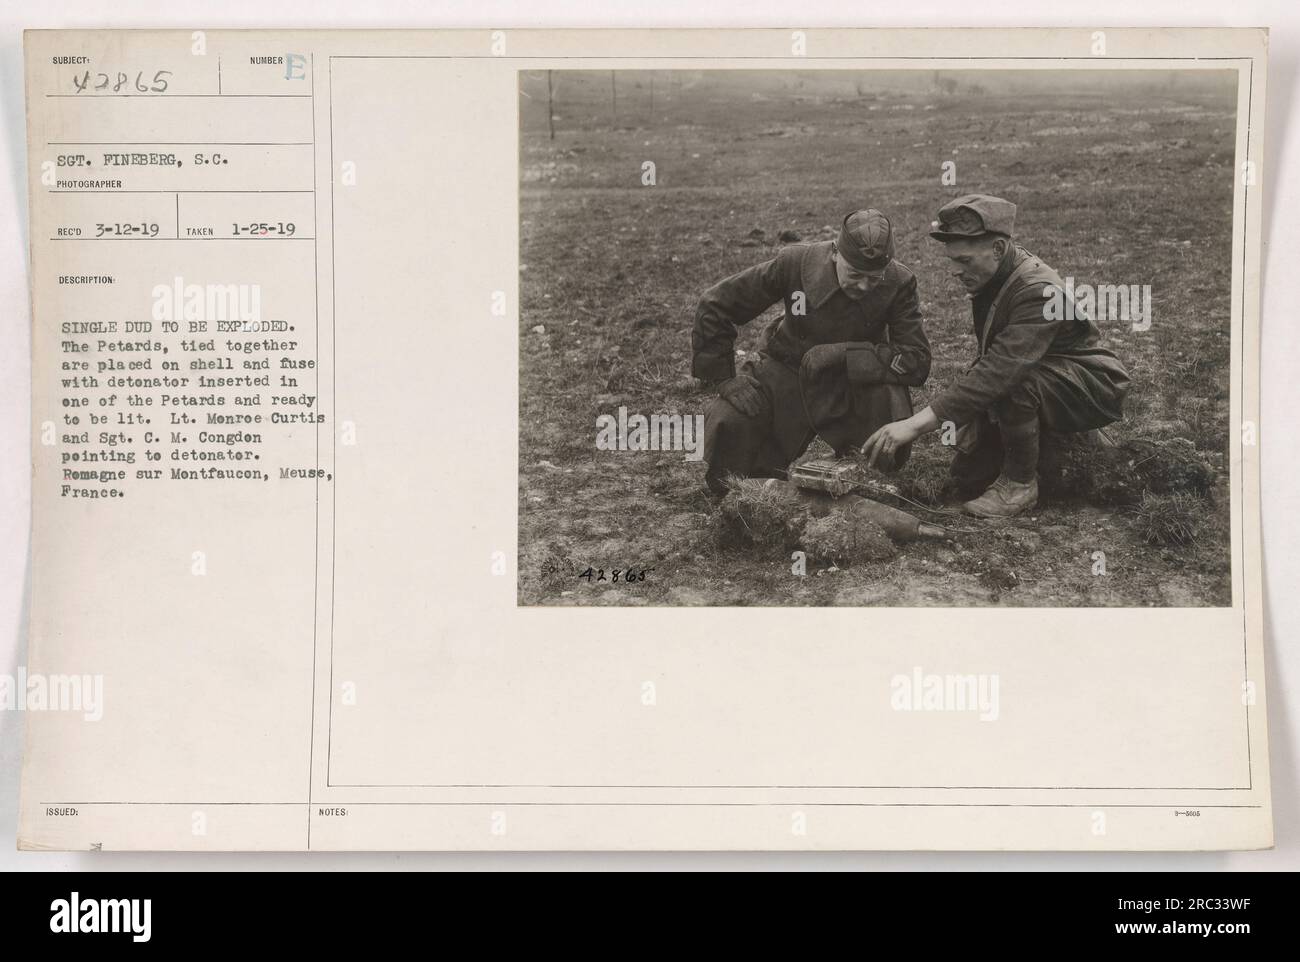 Sgt. Fineberg took a photograph on January 25, 1919, showing a hibere single dud being prepared for detonation. The Petards, tied together, were placed on a shell with a fuse and a detonator inserted into one of them. Lt. Monroe Curtis and Sgt. C. M. Congdon can be seen pointing to the detonator. The image was taken in Remagne sur Montfaucon, Meuse, France. Stock Photo